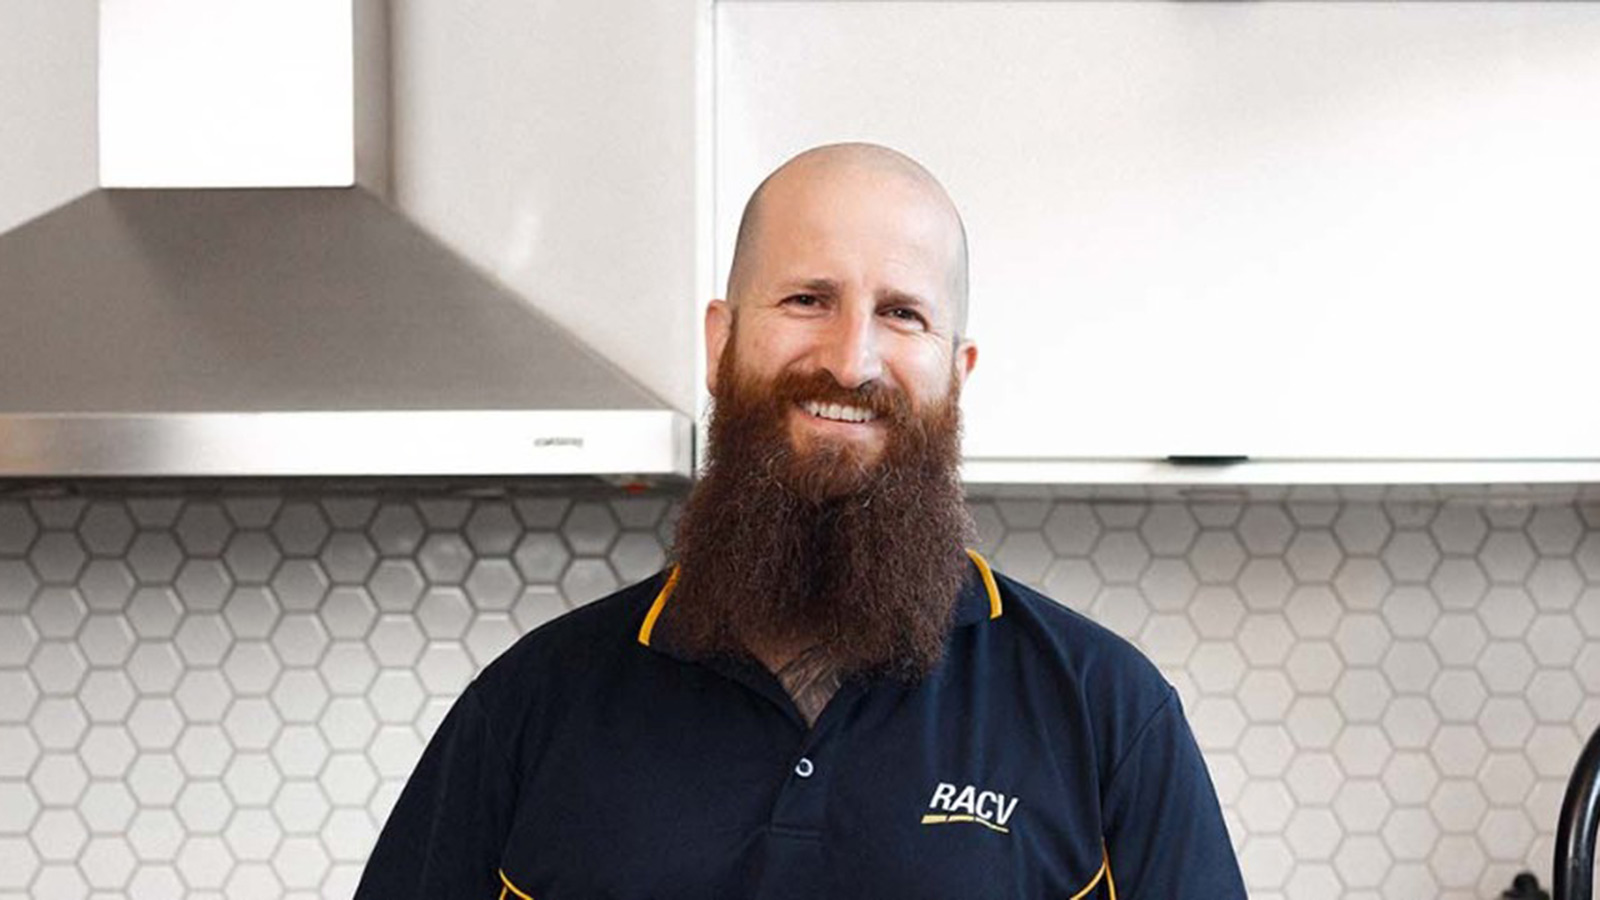 RACV tradesperson standing in kitchen and smiling.